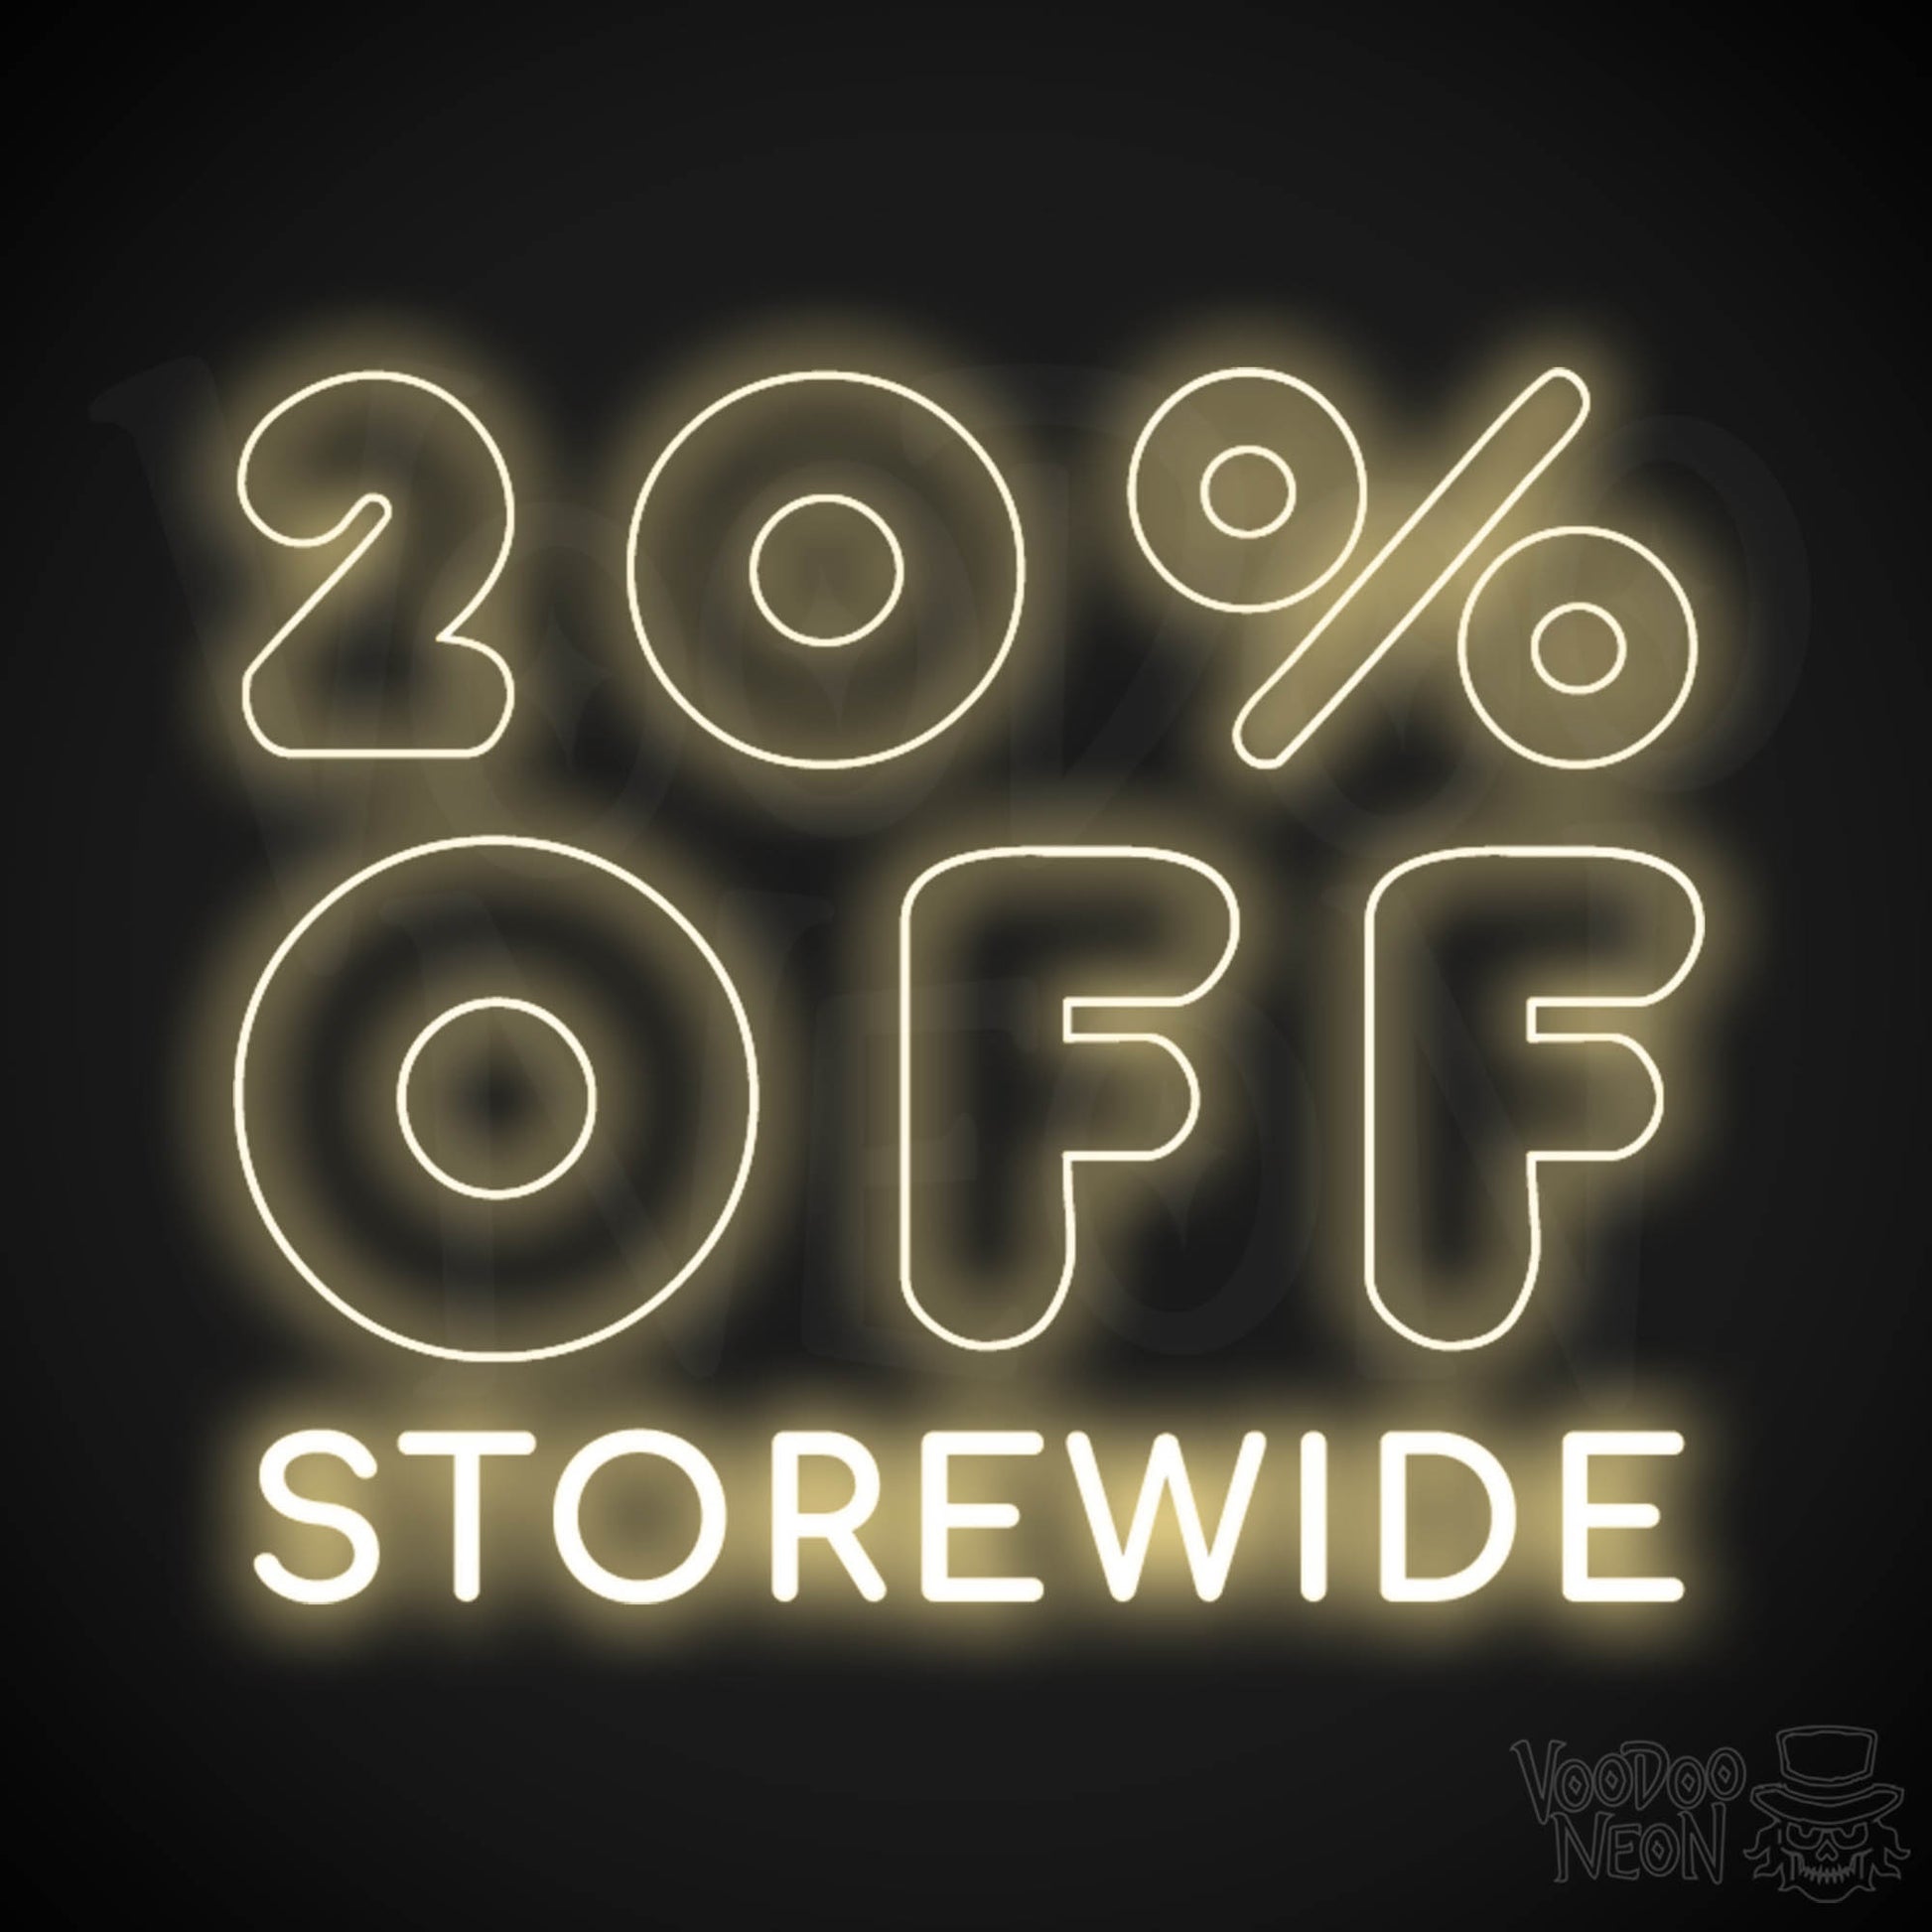 20% Off Storewide Neon Sign - 20% Off Storewide Sign - LED Shop Sign - Color Warm White